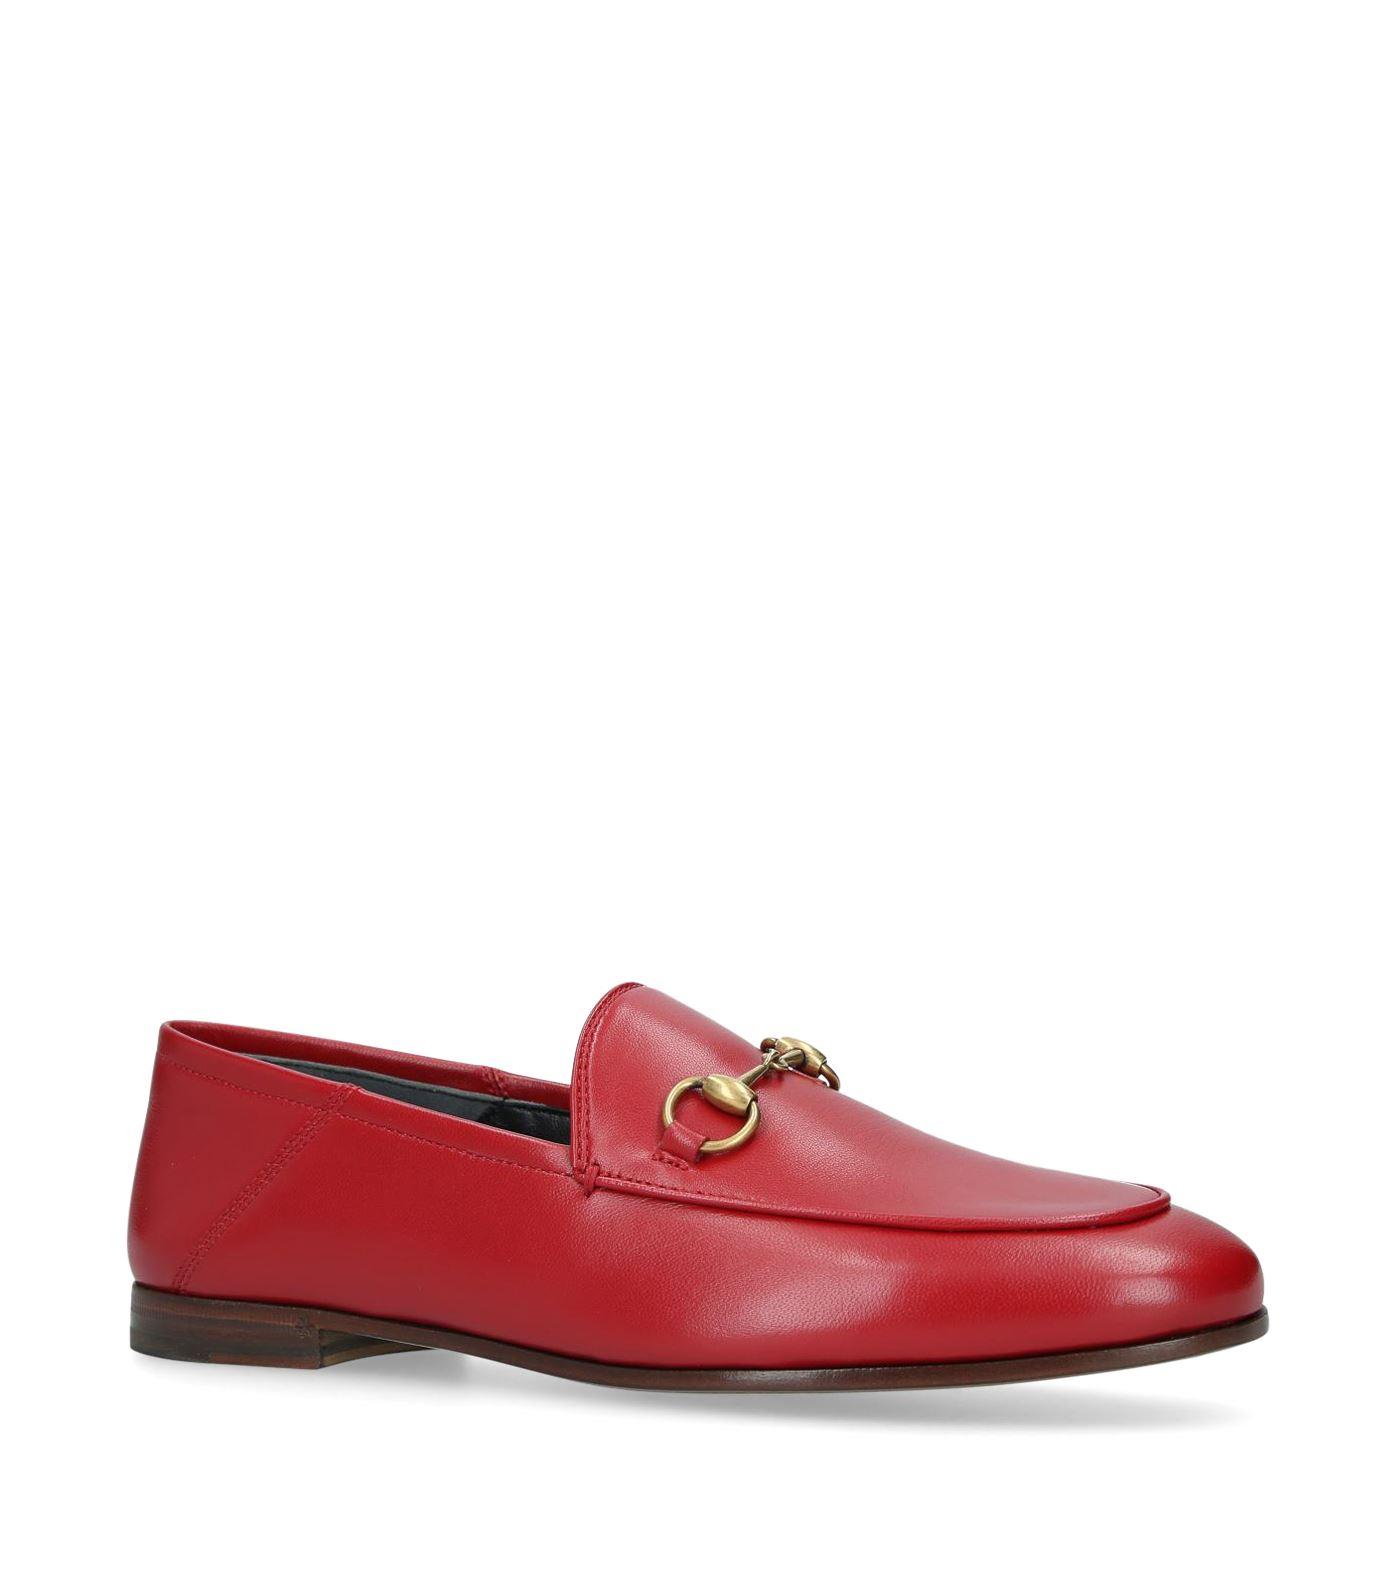 Gucci Leather Brixton Loafers in Dark Red Leather (Red) - Save 18% - Lyst